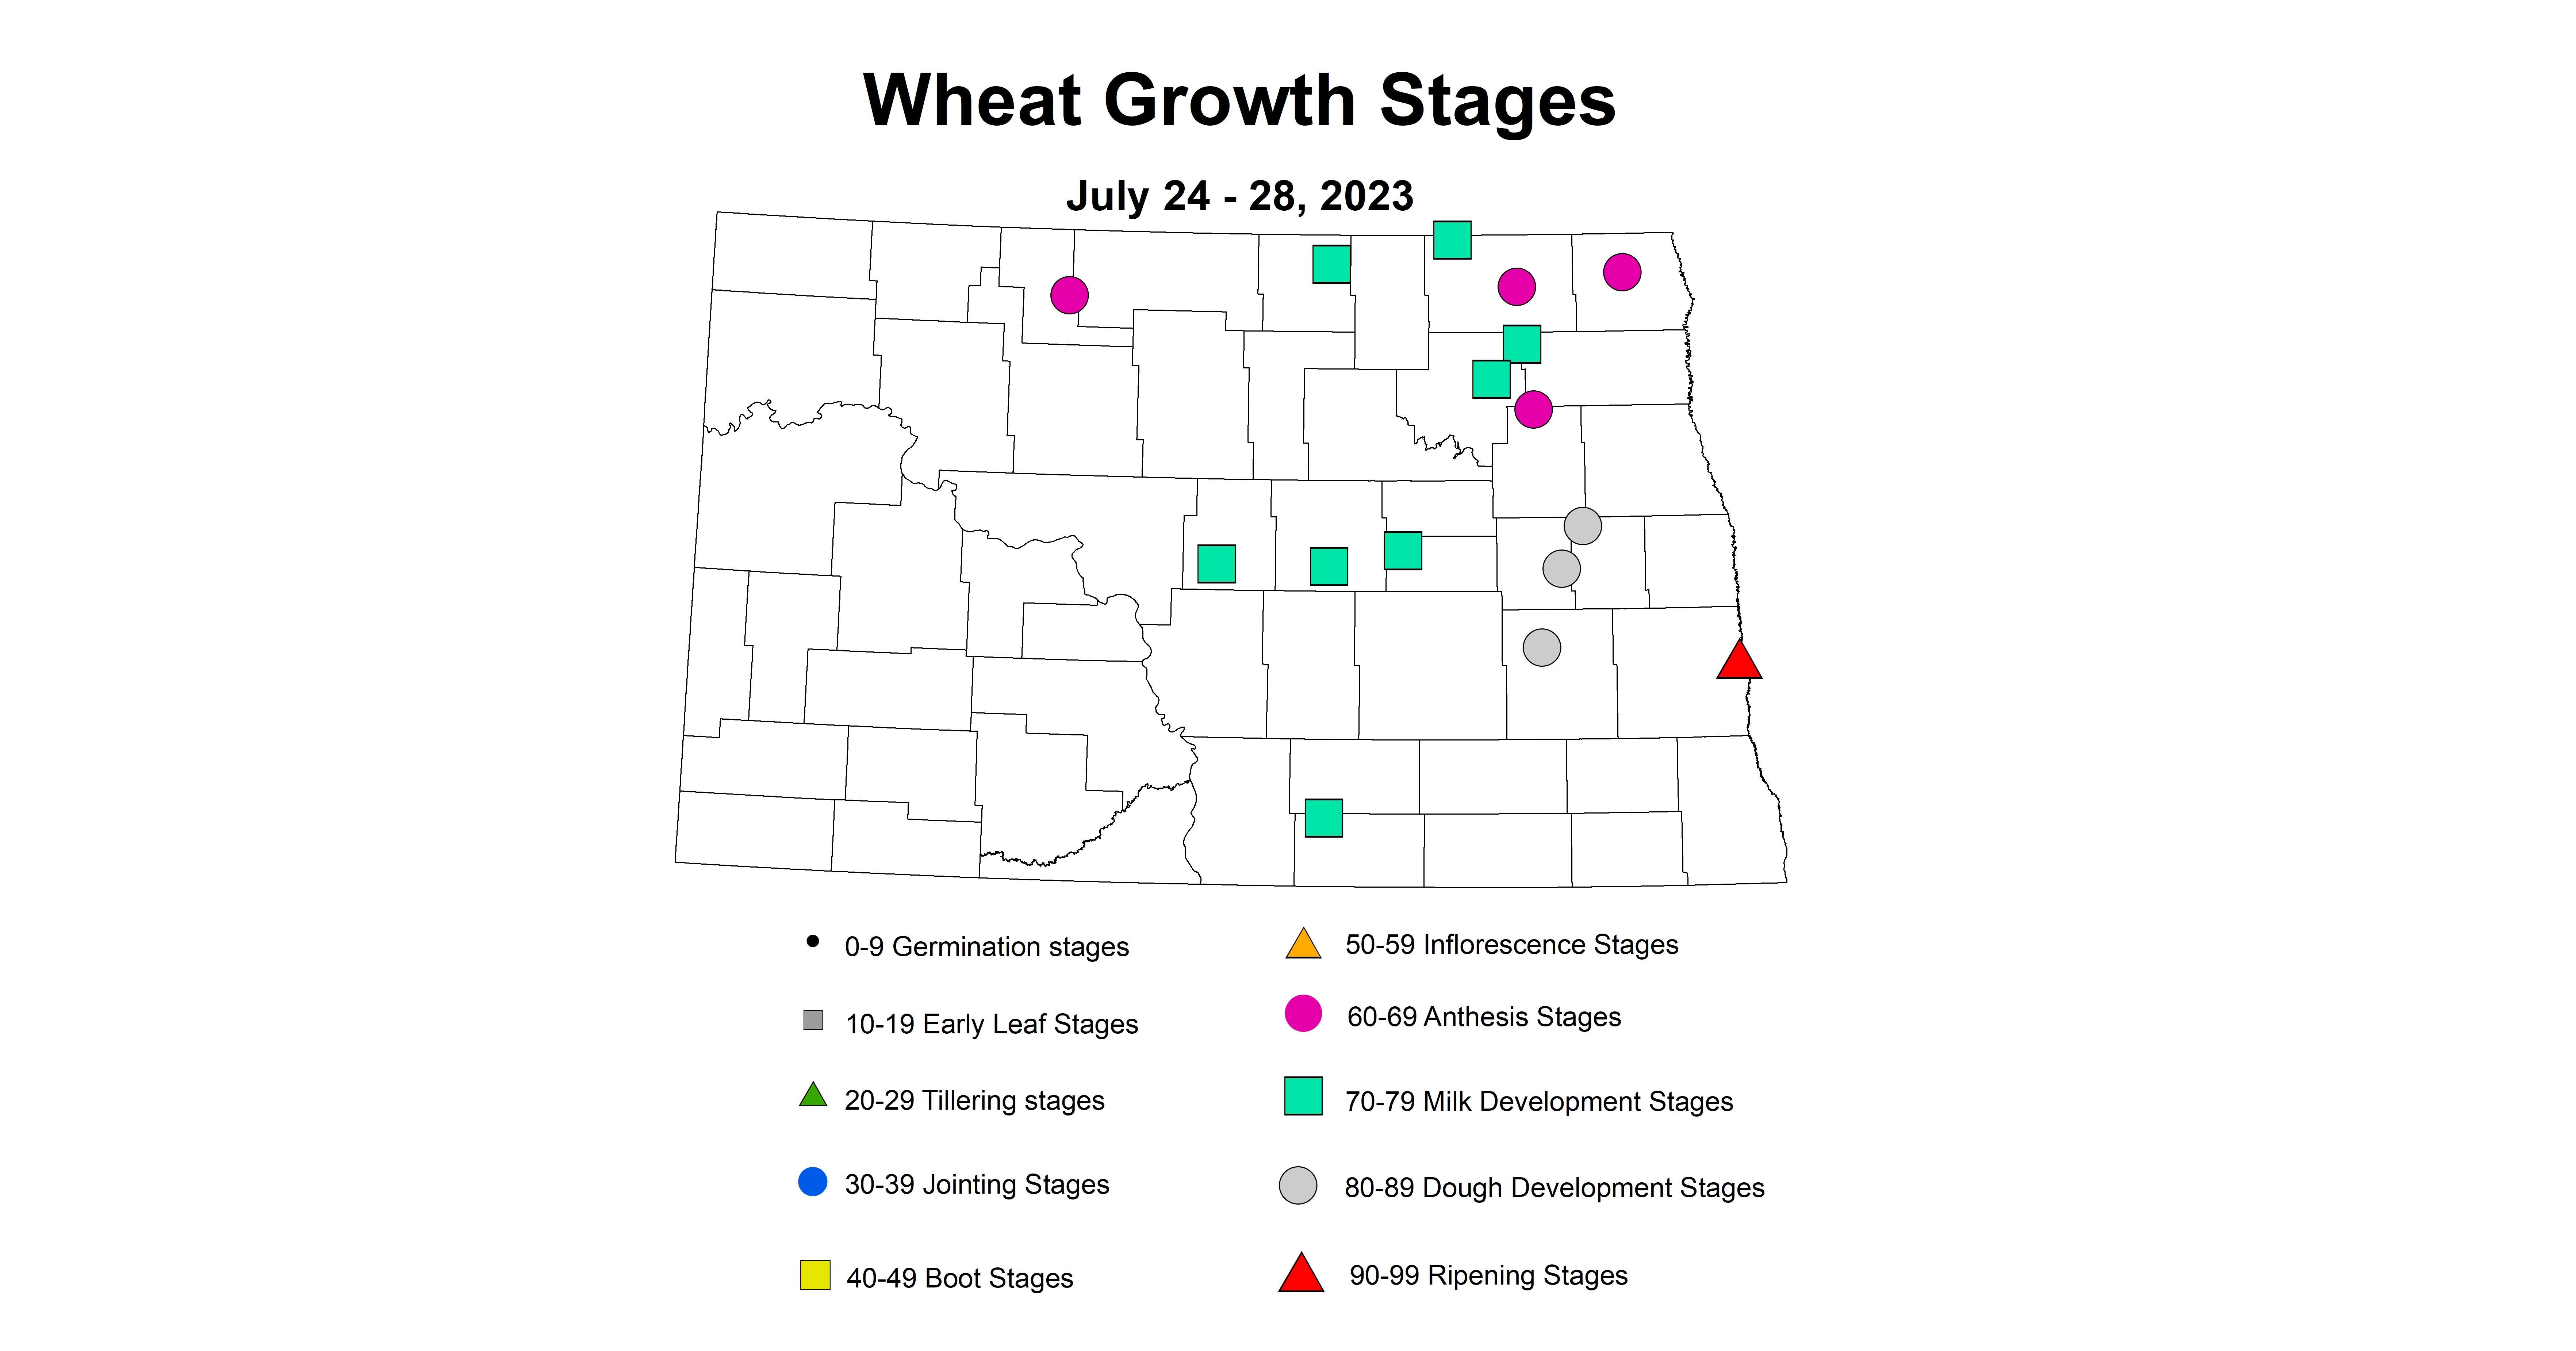 wheat insecttrap growth stages July 24-28 2023